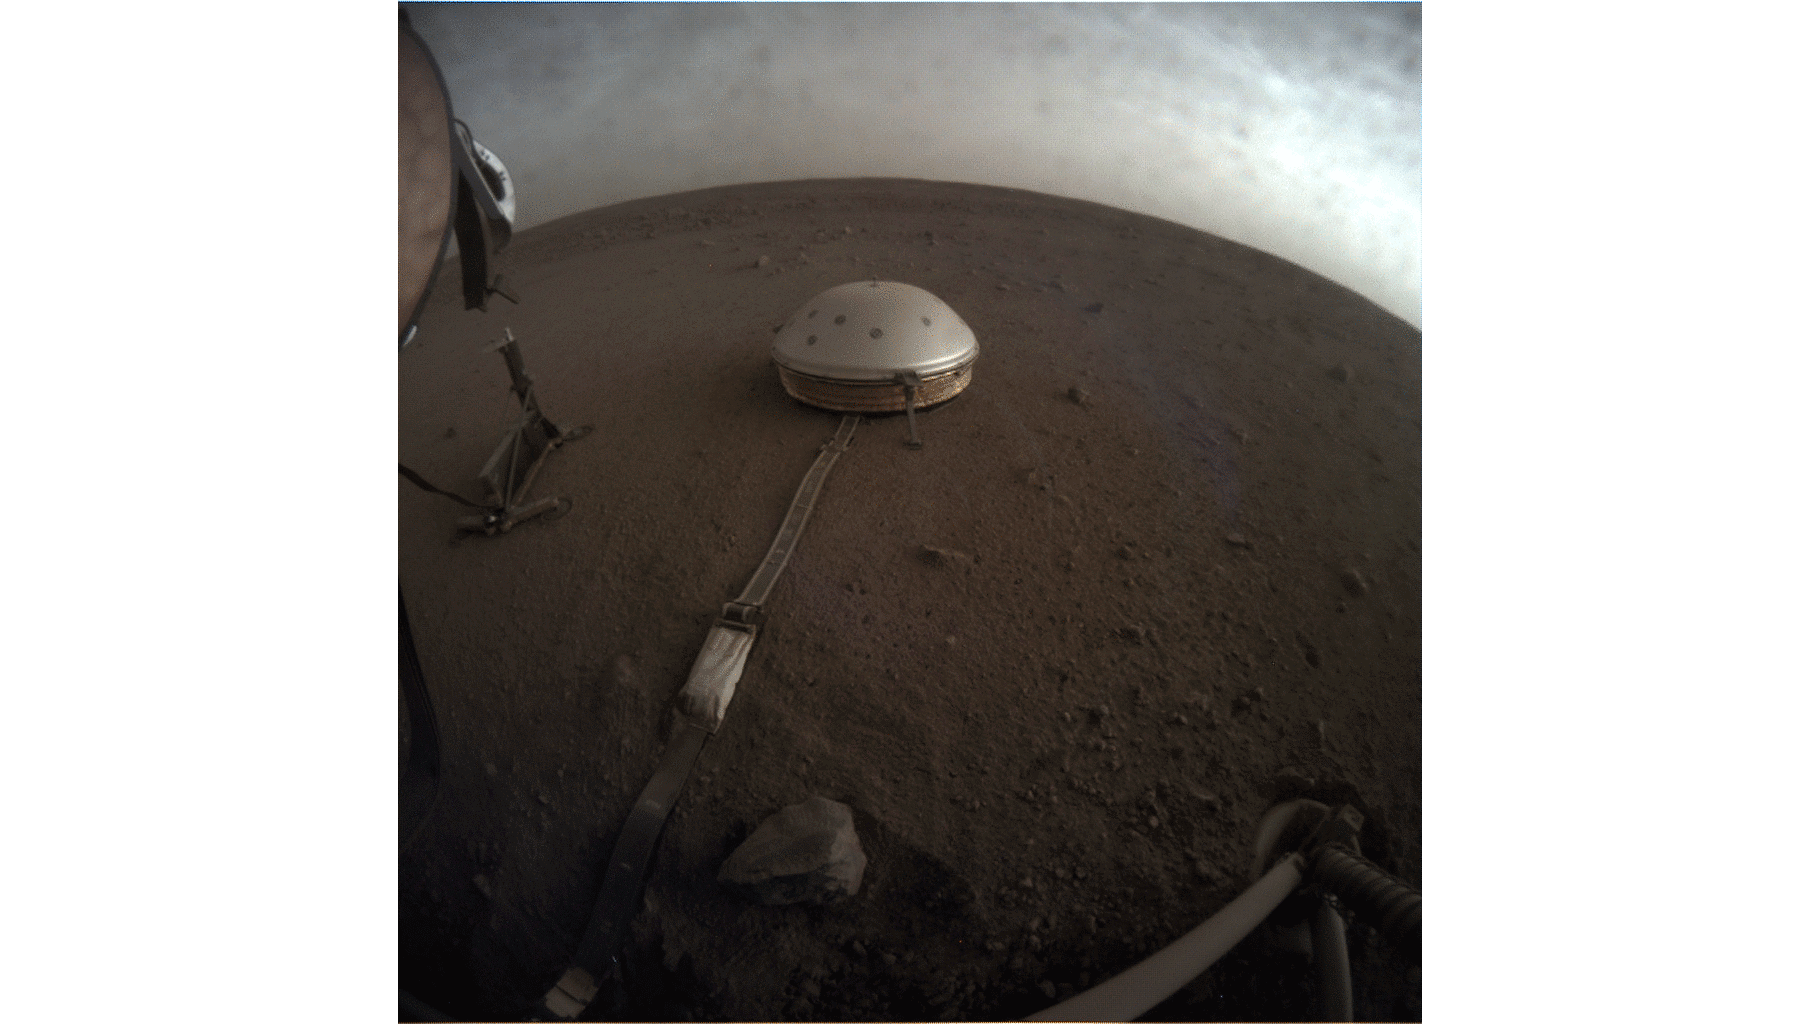 NASA's InSight used its Instrument Context Camera (ICC) beneath the lander's deck to image these drifting clouds at sunset. This series of images was taken on April 25, 2019, the 145th Martian day, or sol, of the mission, starting at around 6:30 p.m. Mars local time.